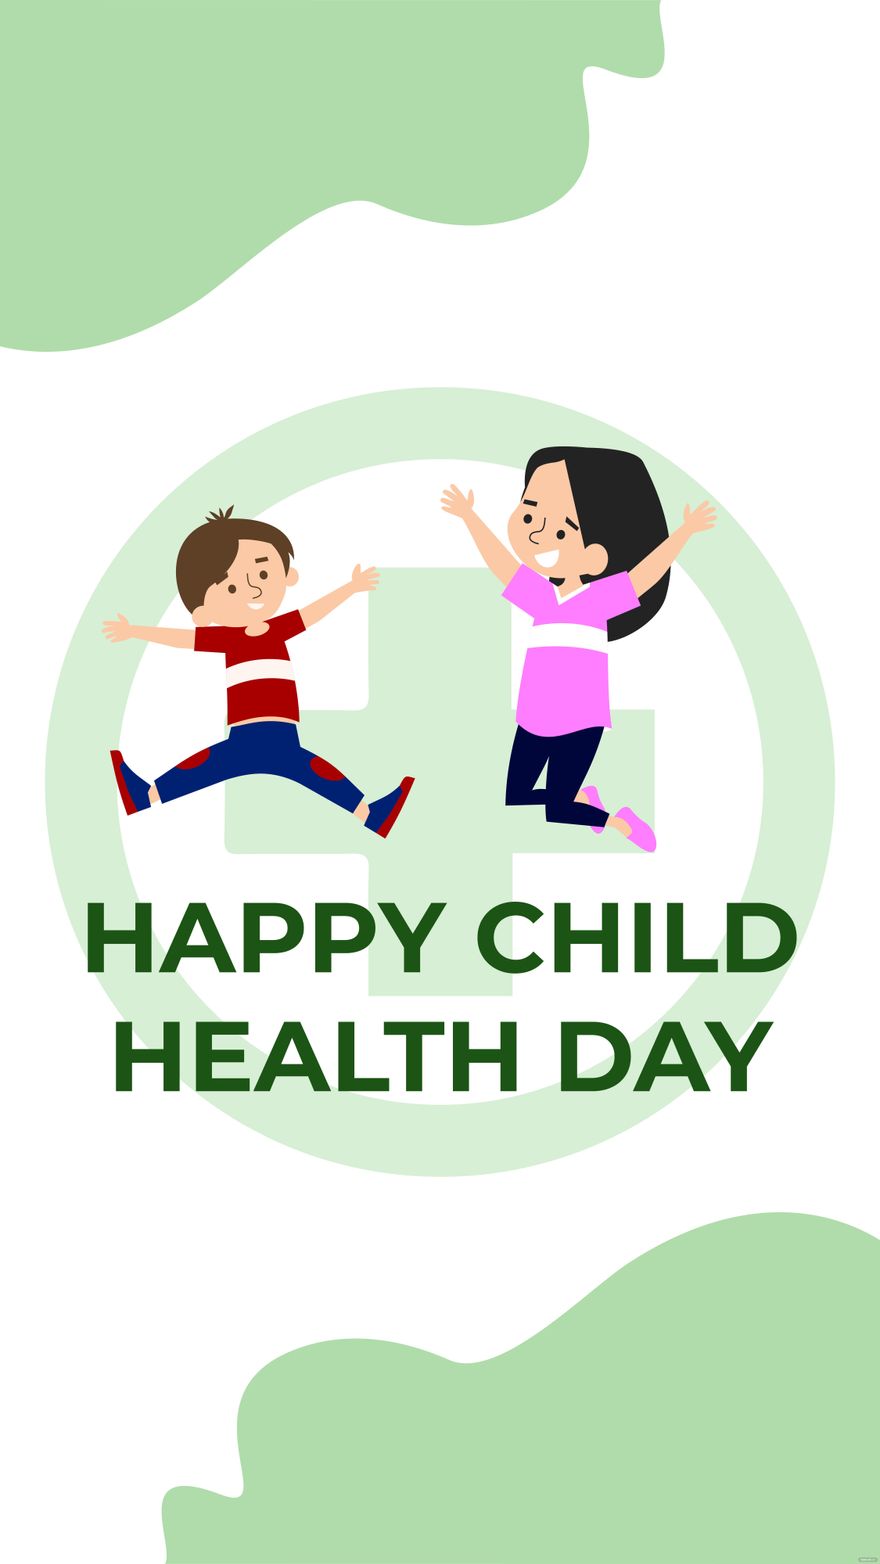 Child Health Day iPhone Background in PDF, Illustrator, PSD, EPS, SVG, JPG, PNG